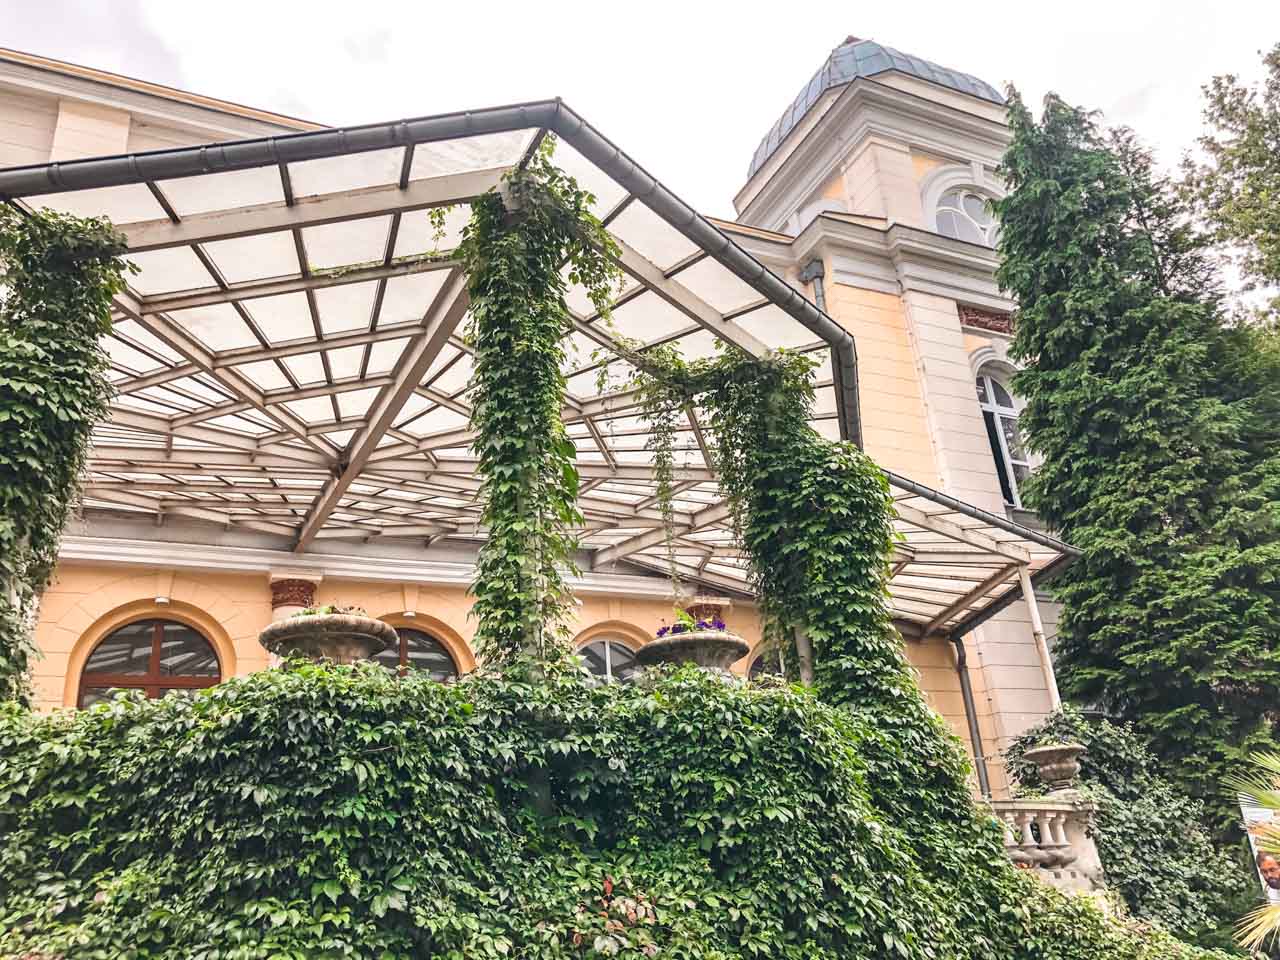 An ivy-covered terrace of a restaurant inside the Wrocław Zoo